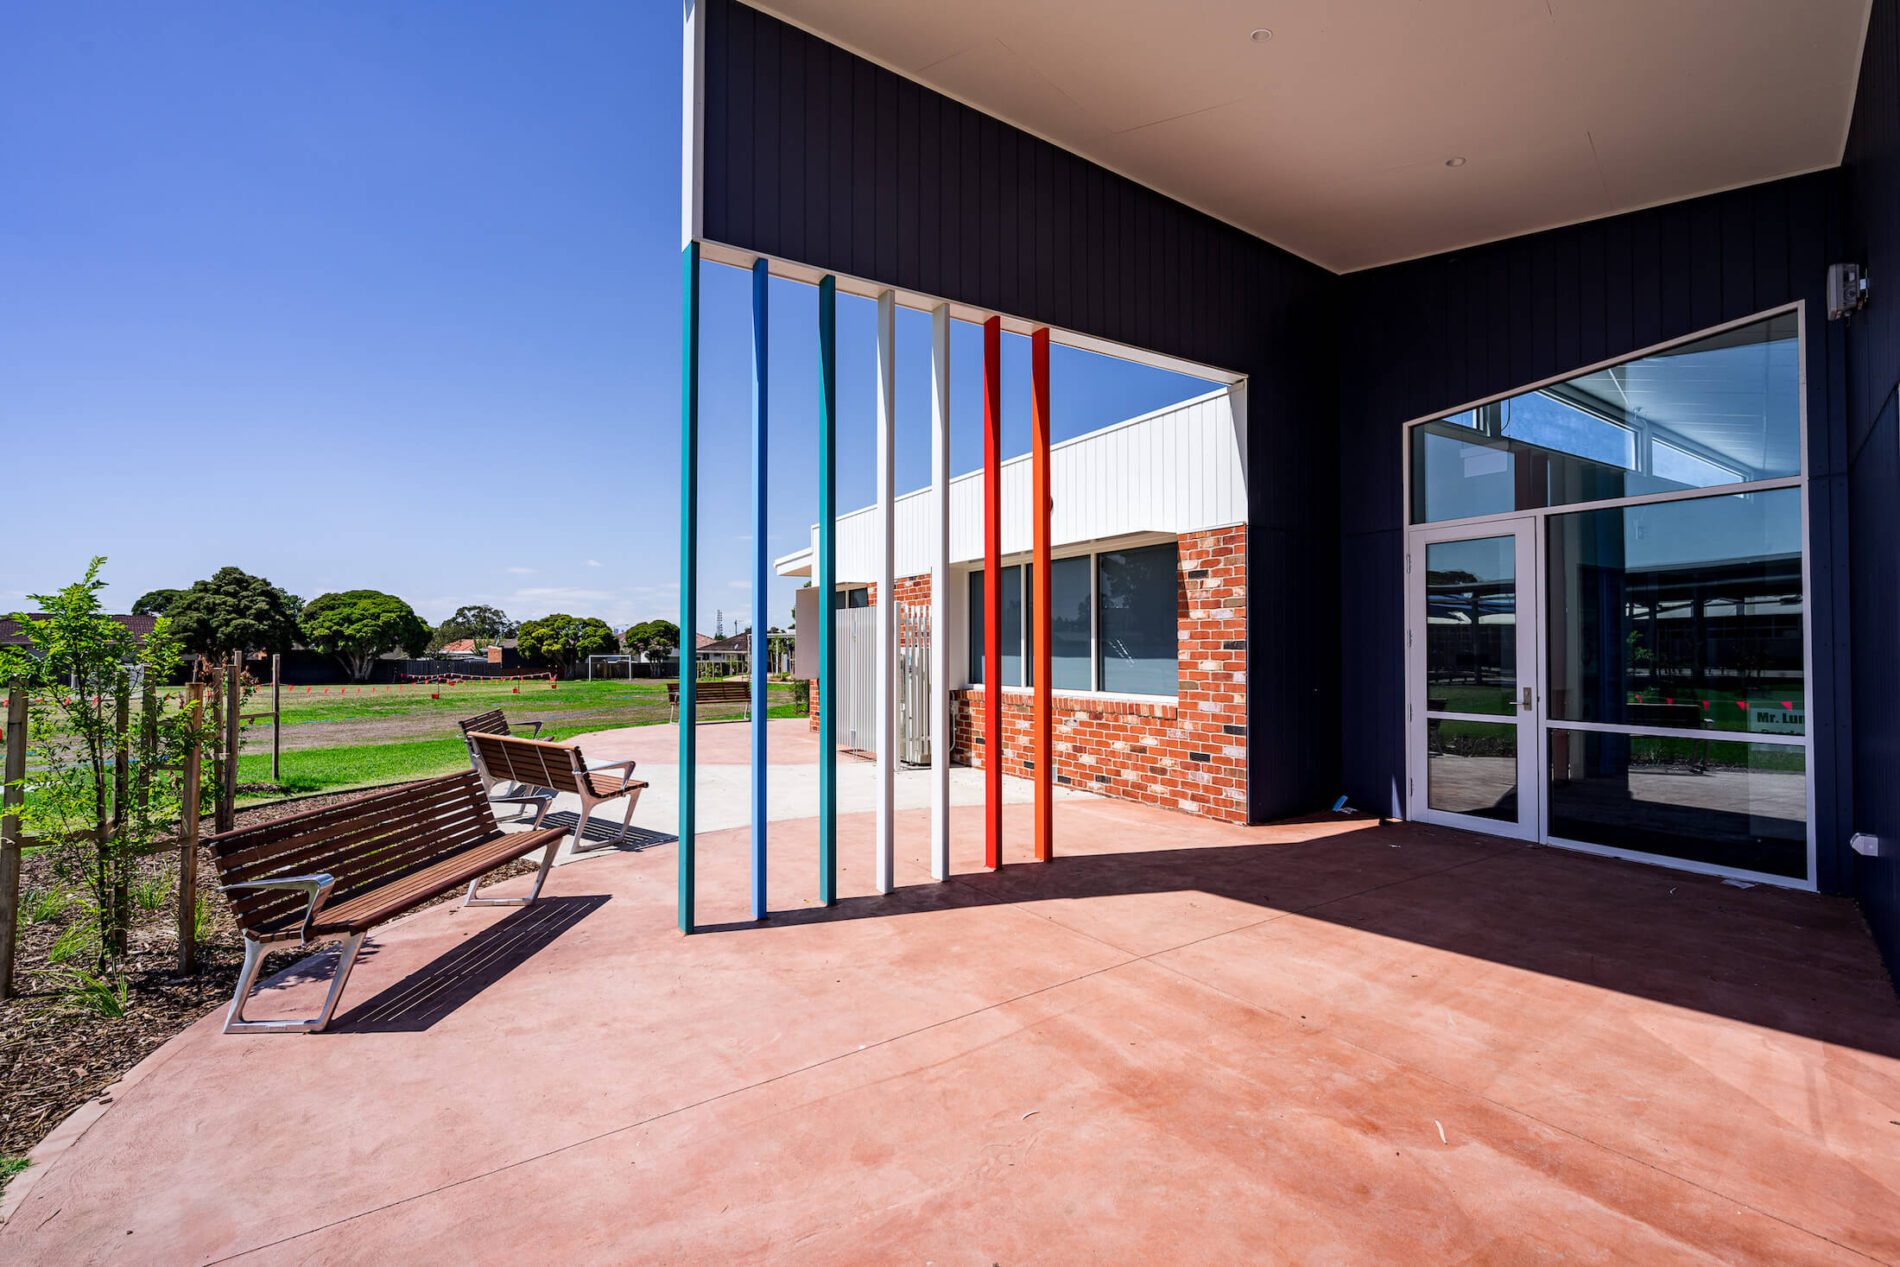 Colourful feature and school entry canopy with seating and oval beyond